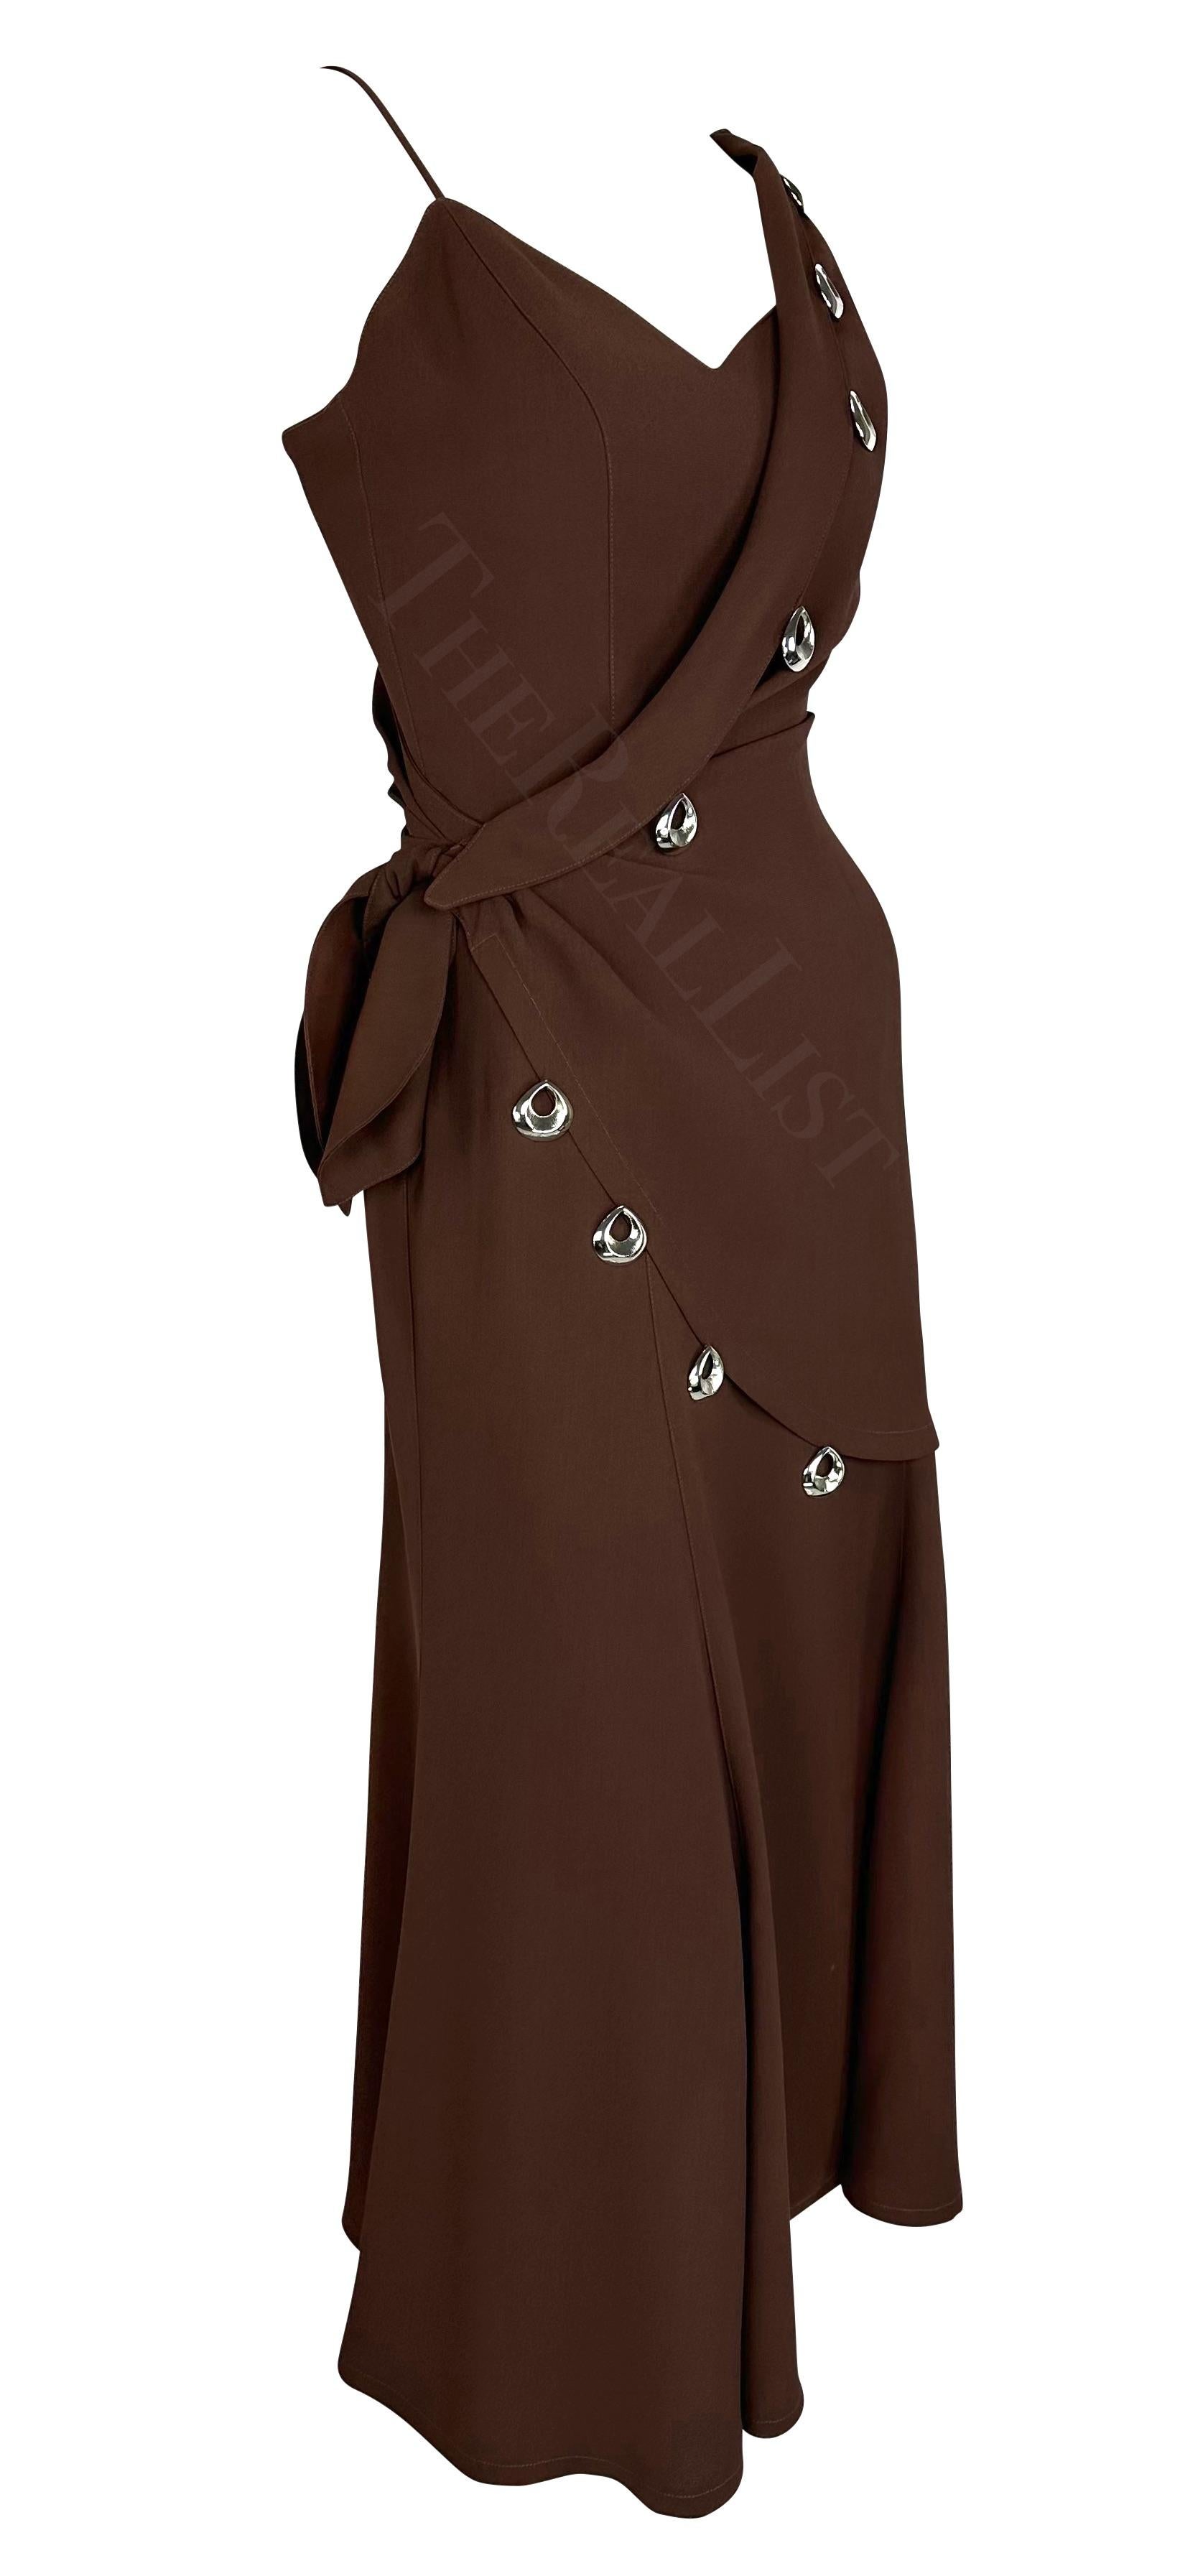 S/S 1998 Thierry Mugler Silver Abstract Pendant Brown Wrap Drape Maxi Dress  For Sale 2